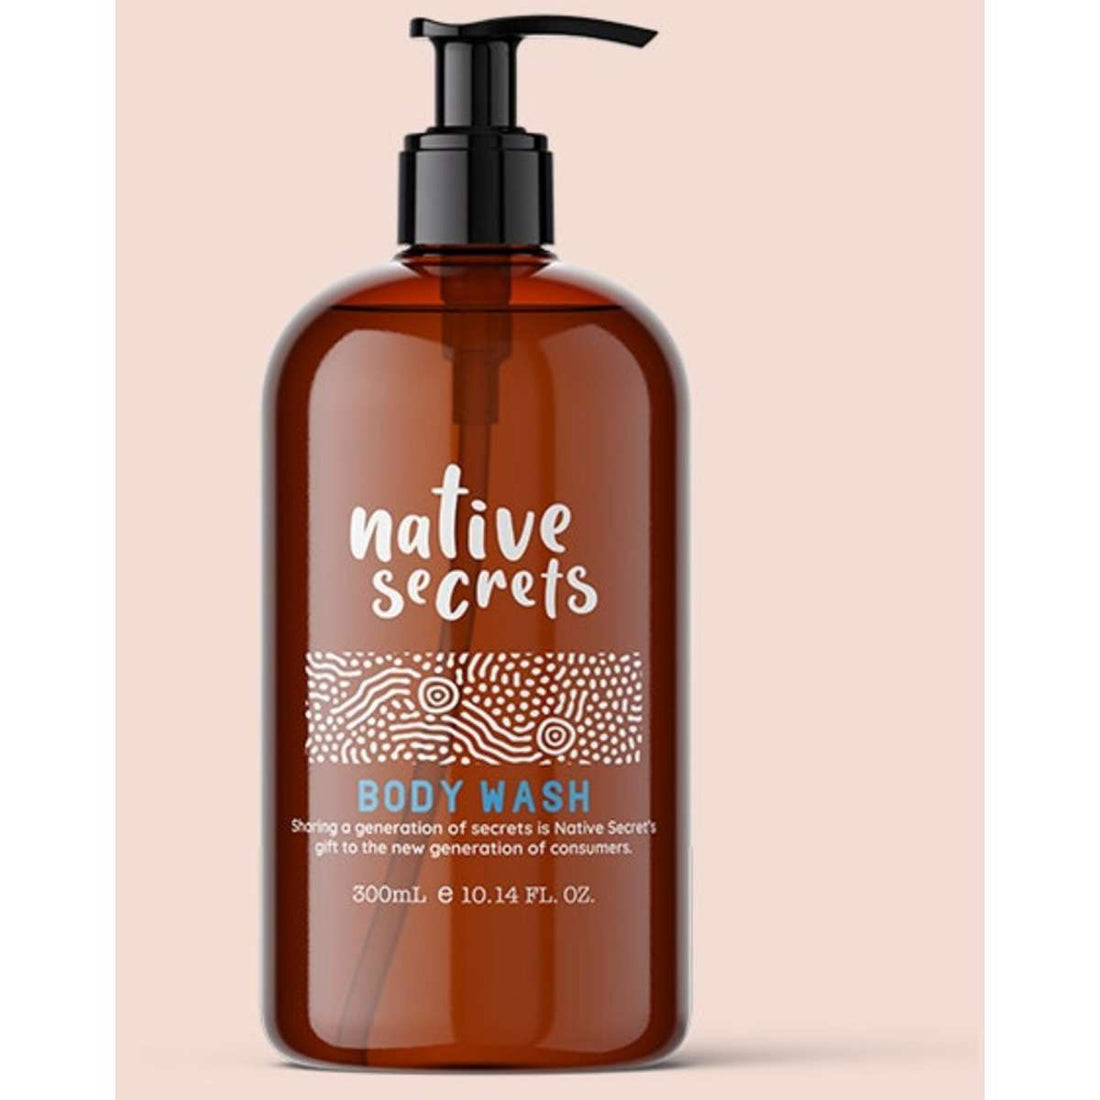 Native Secrets Australian Made Body Wash and Body Lotion 300ml - 2 Pack